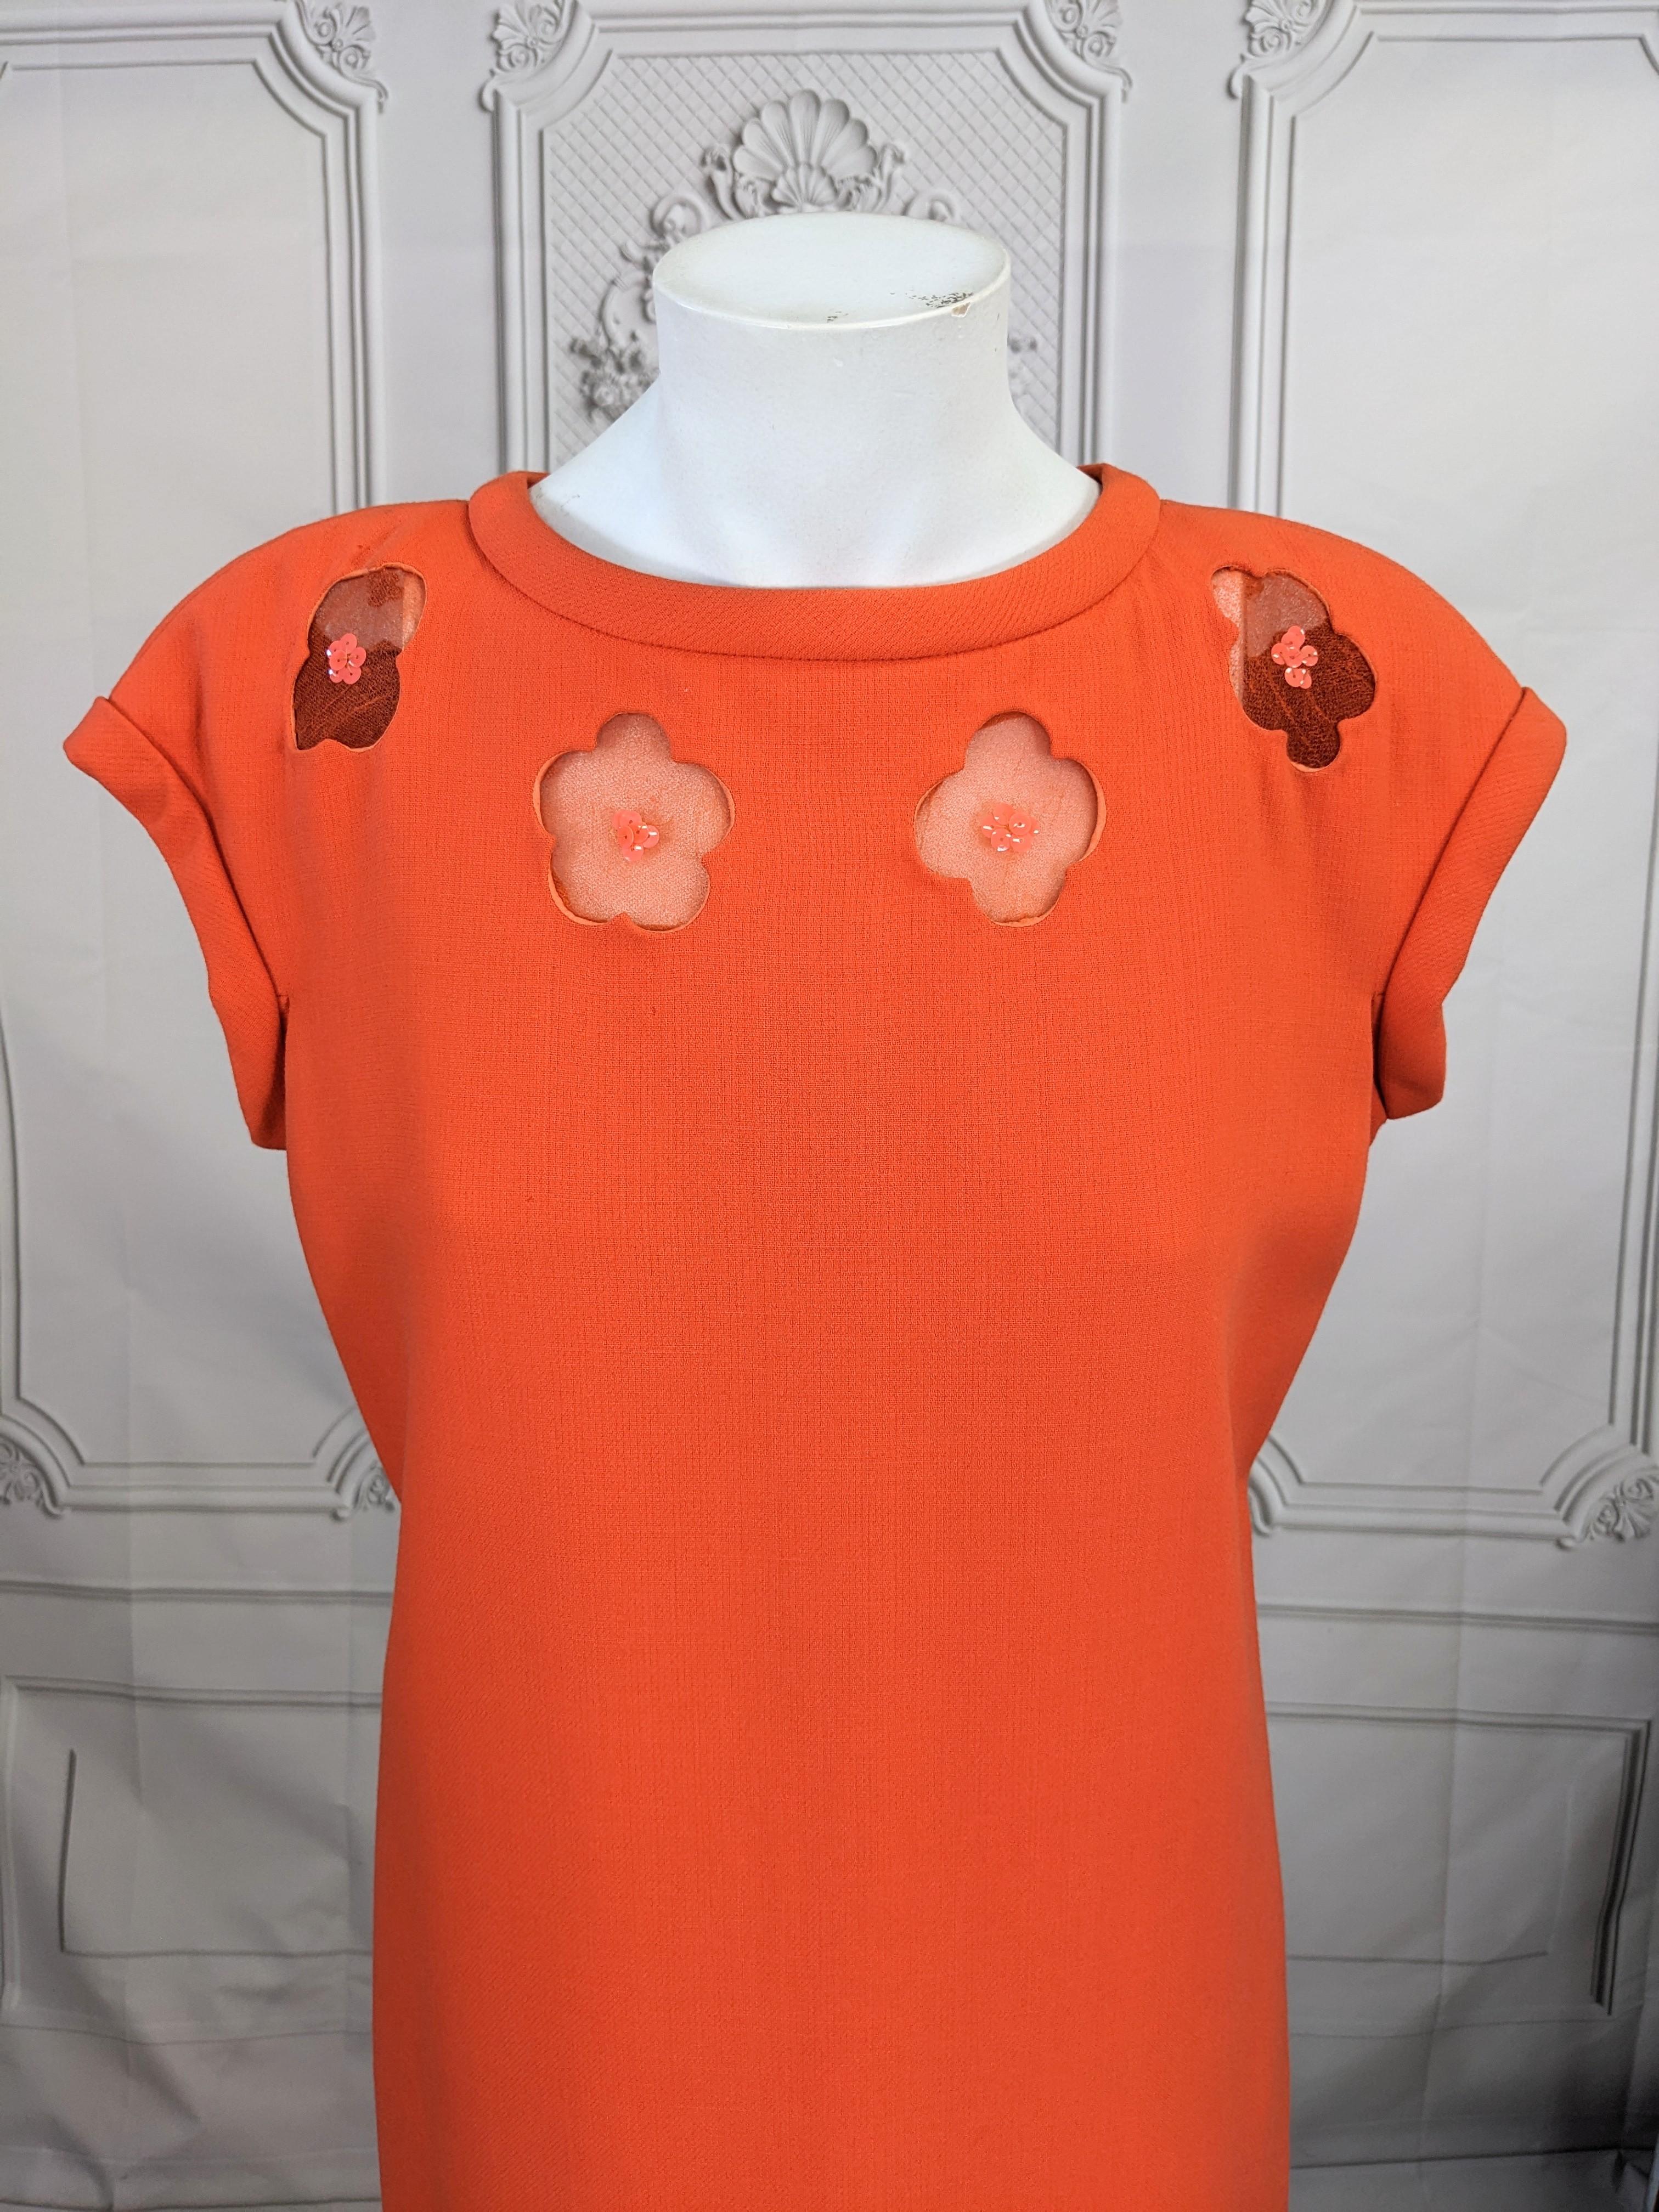 Andre Courreges Couture Pop Maxi Gown of vibrant orange wool with sheer floral inserts at neckline with sequin centers. Clean lined silhouette with slight A lined flare at hem. Designed to showcase the form, color and shape as well as the client.